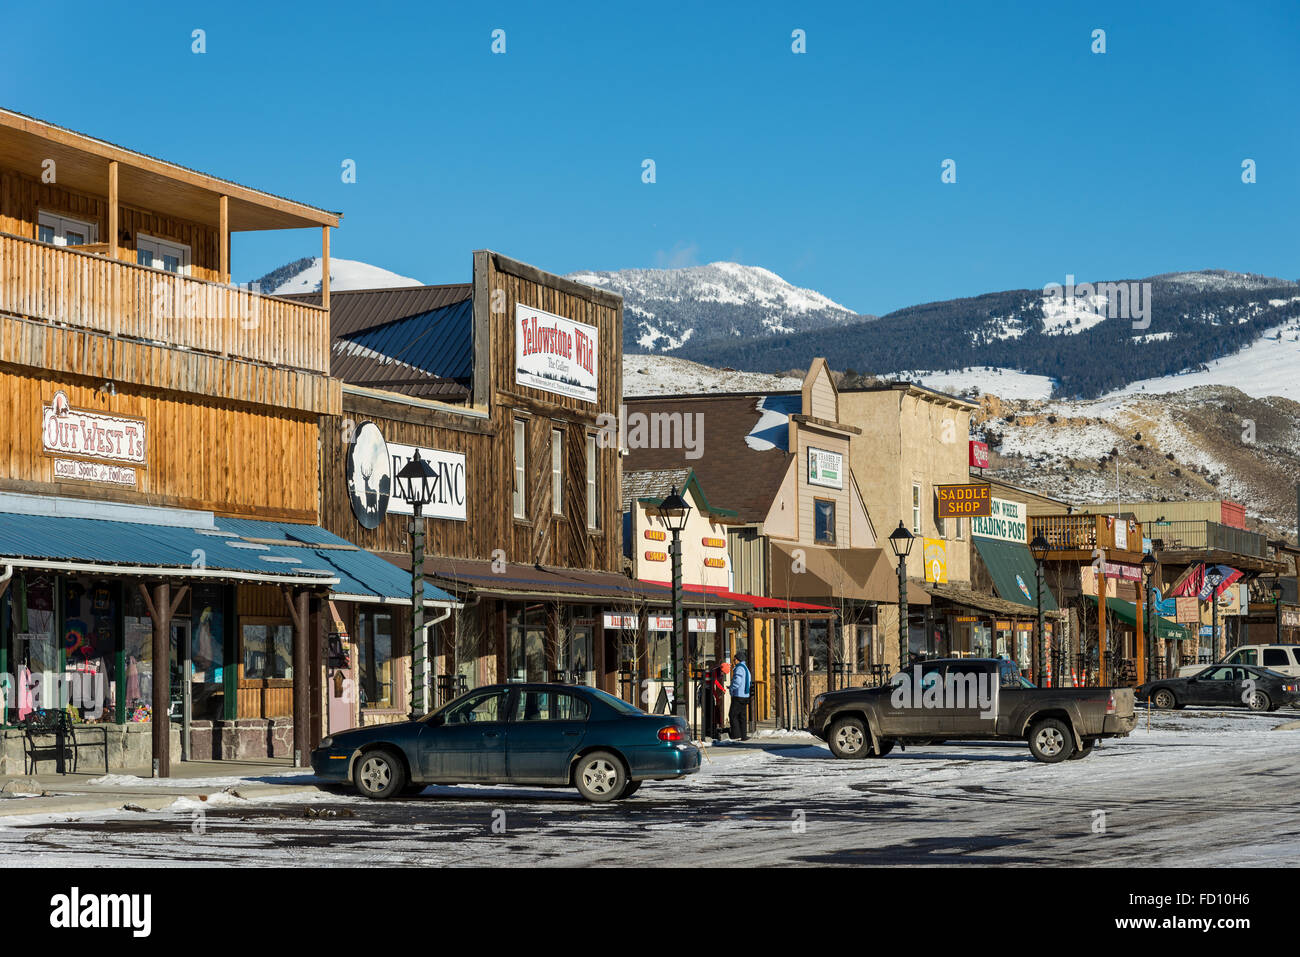 Street of a small western town Gardiner located just outside Yellowstone National Park, Montana, USA. Stock Photo